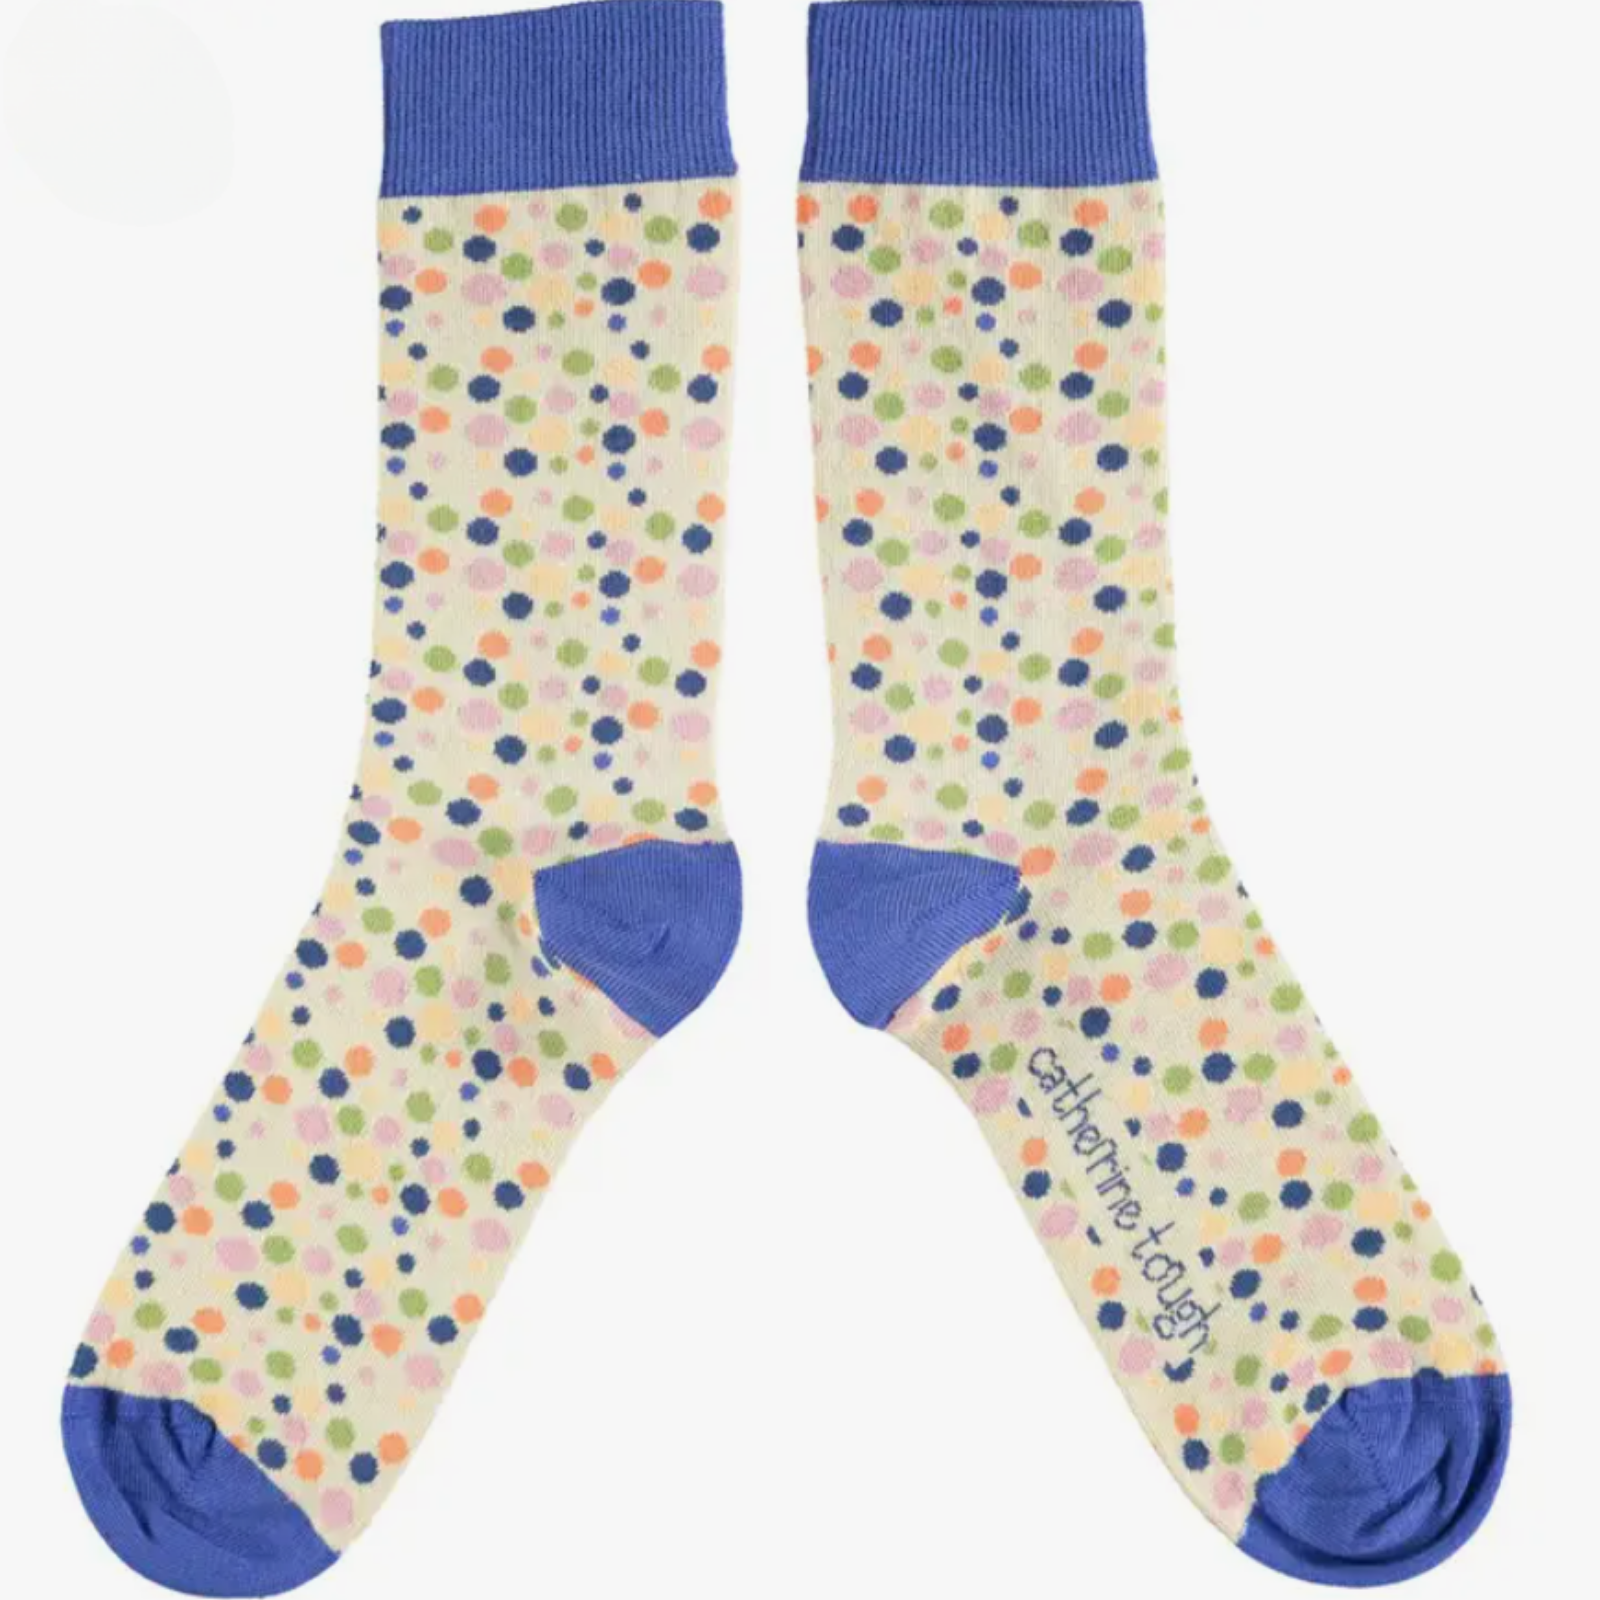 Catherine Tough Polka Dot cotton women's crew socks. The design features blue, green, pink and more polka dots framed with soft blue cuffs, heels & toes.